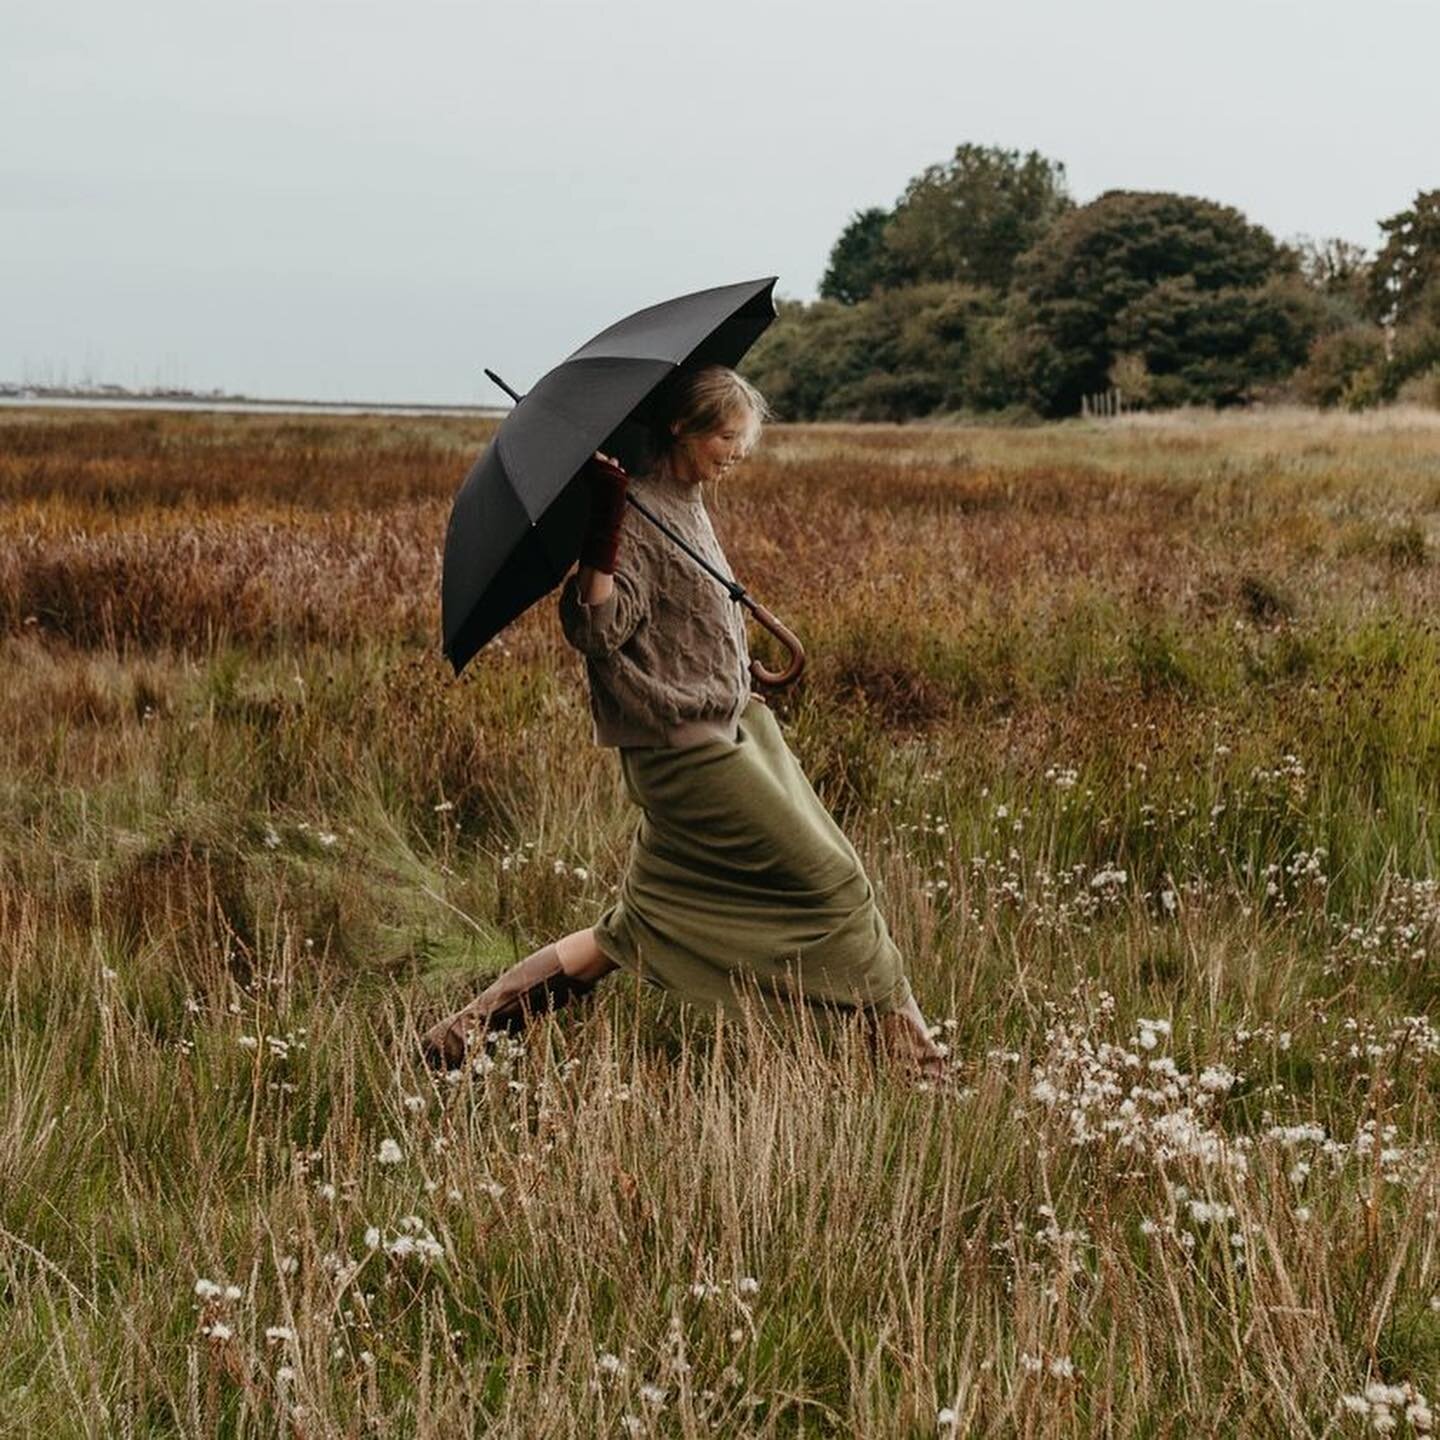 I am beyond thrilled to announce @oubasstudio as a new client. 

Kate is a pioneer in sustainable fashion, making impeccable knitwear to order, harnessing local craftsmanship and the Cumbrian palette, making the case for truly sustainable design in w